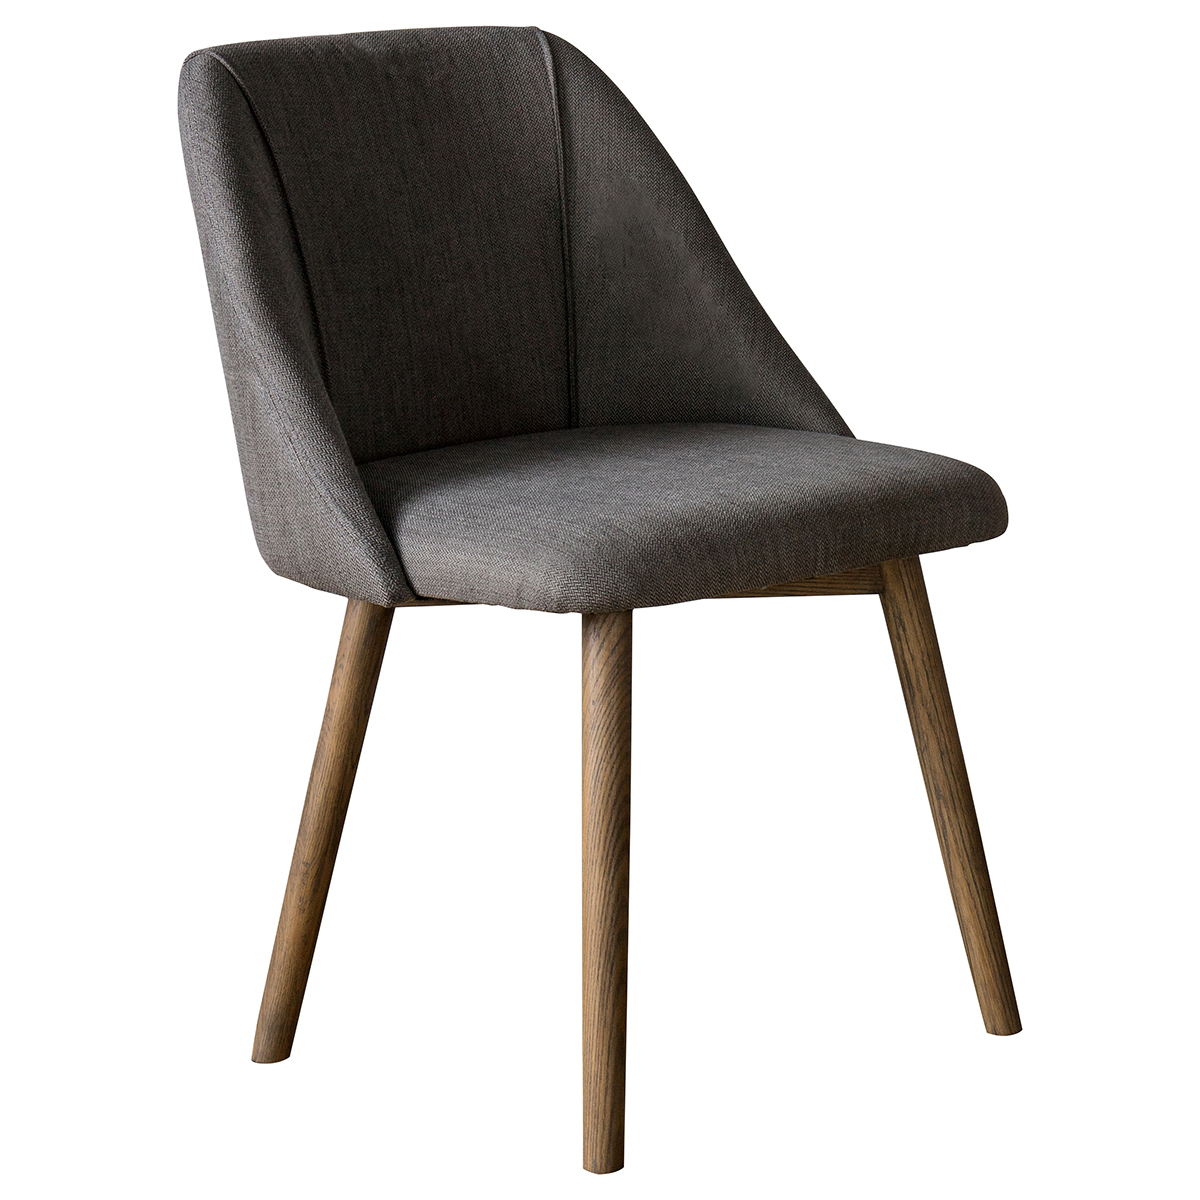 Gallery Direct Elliot Dining Chair Slate Grey (Set of 2)